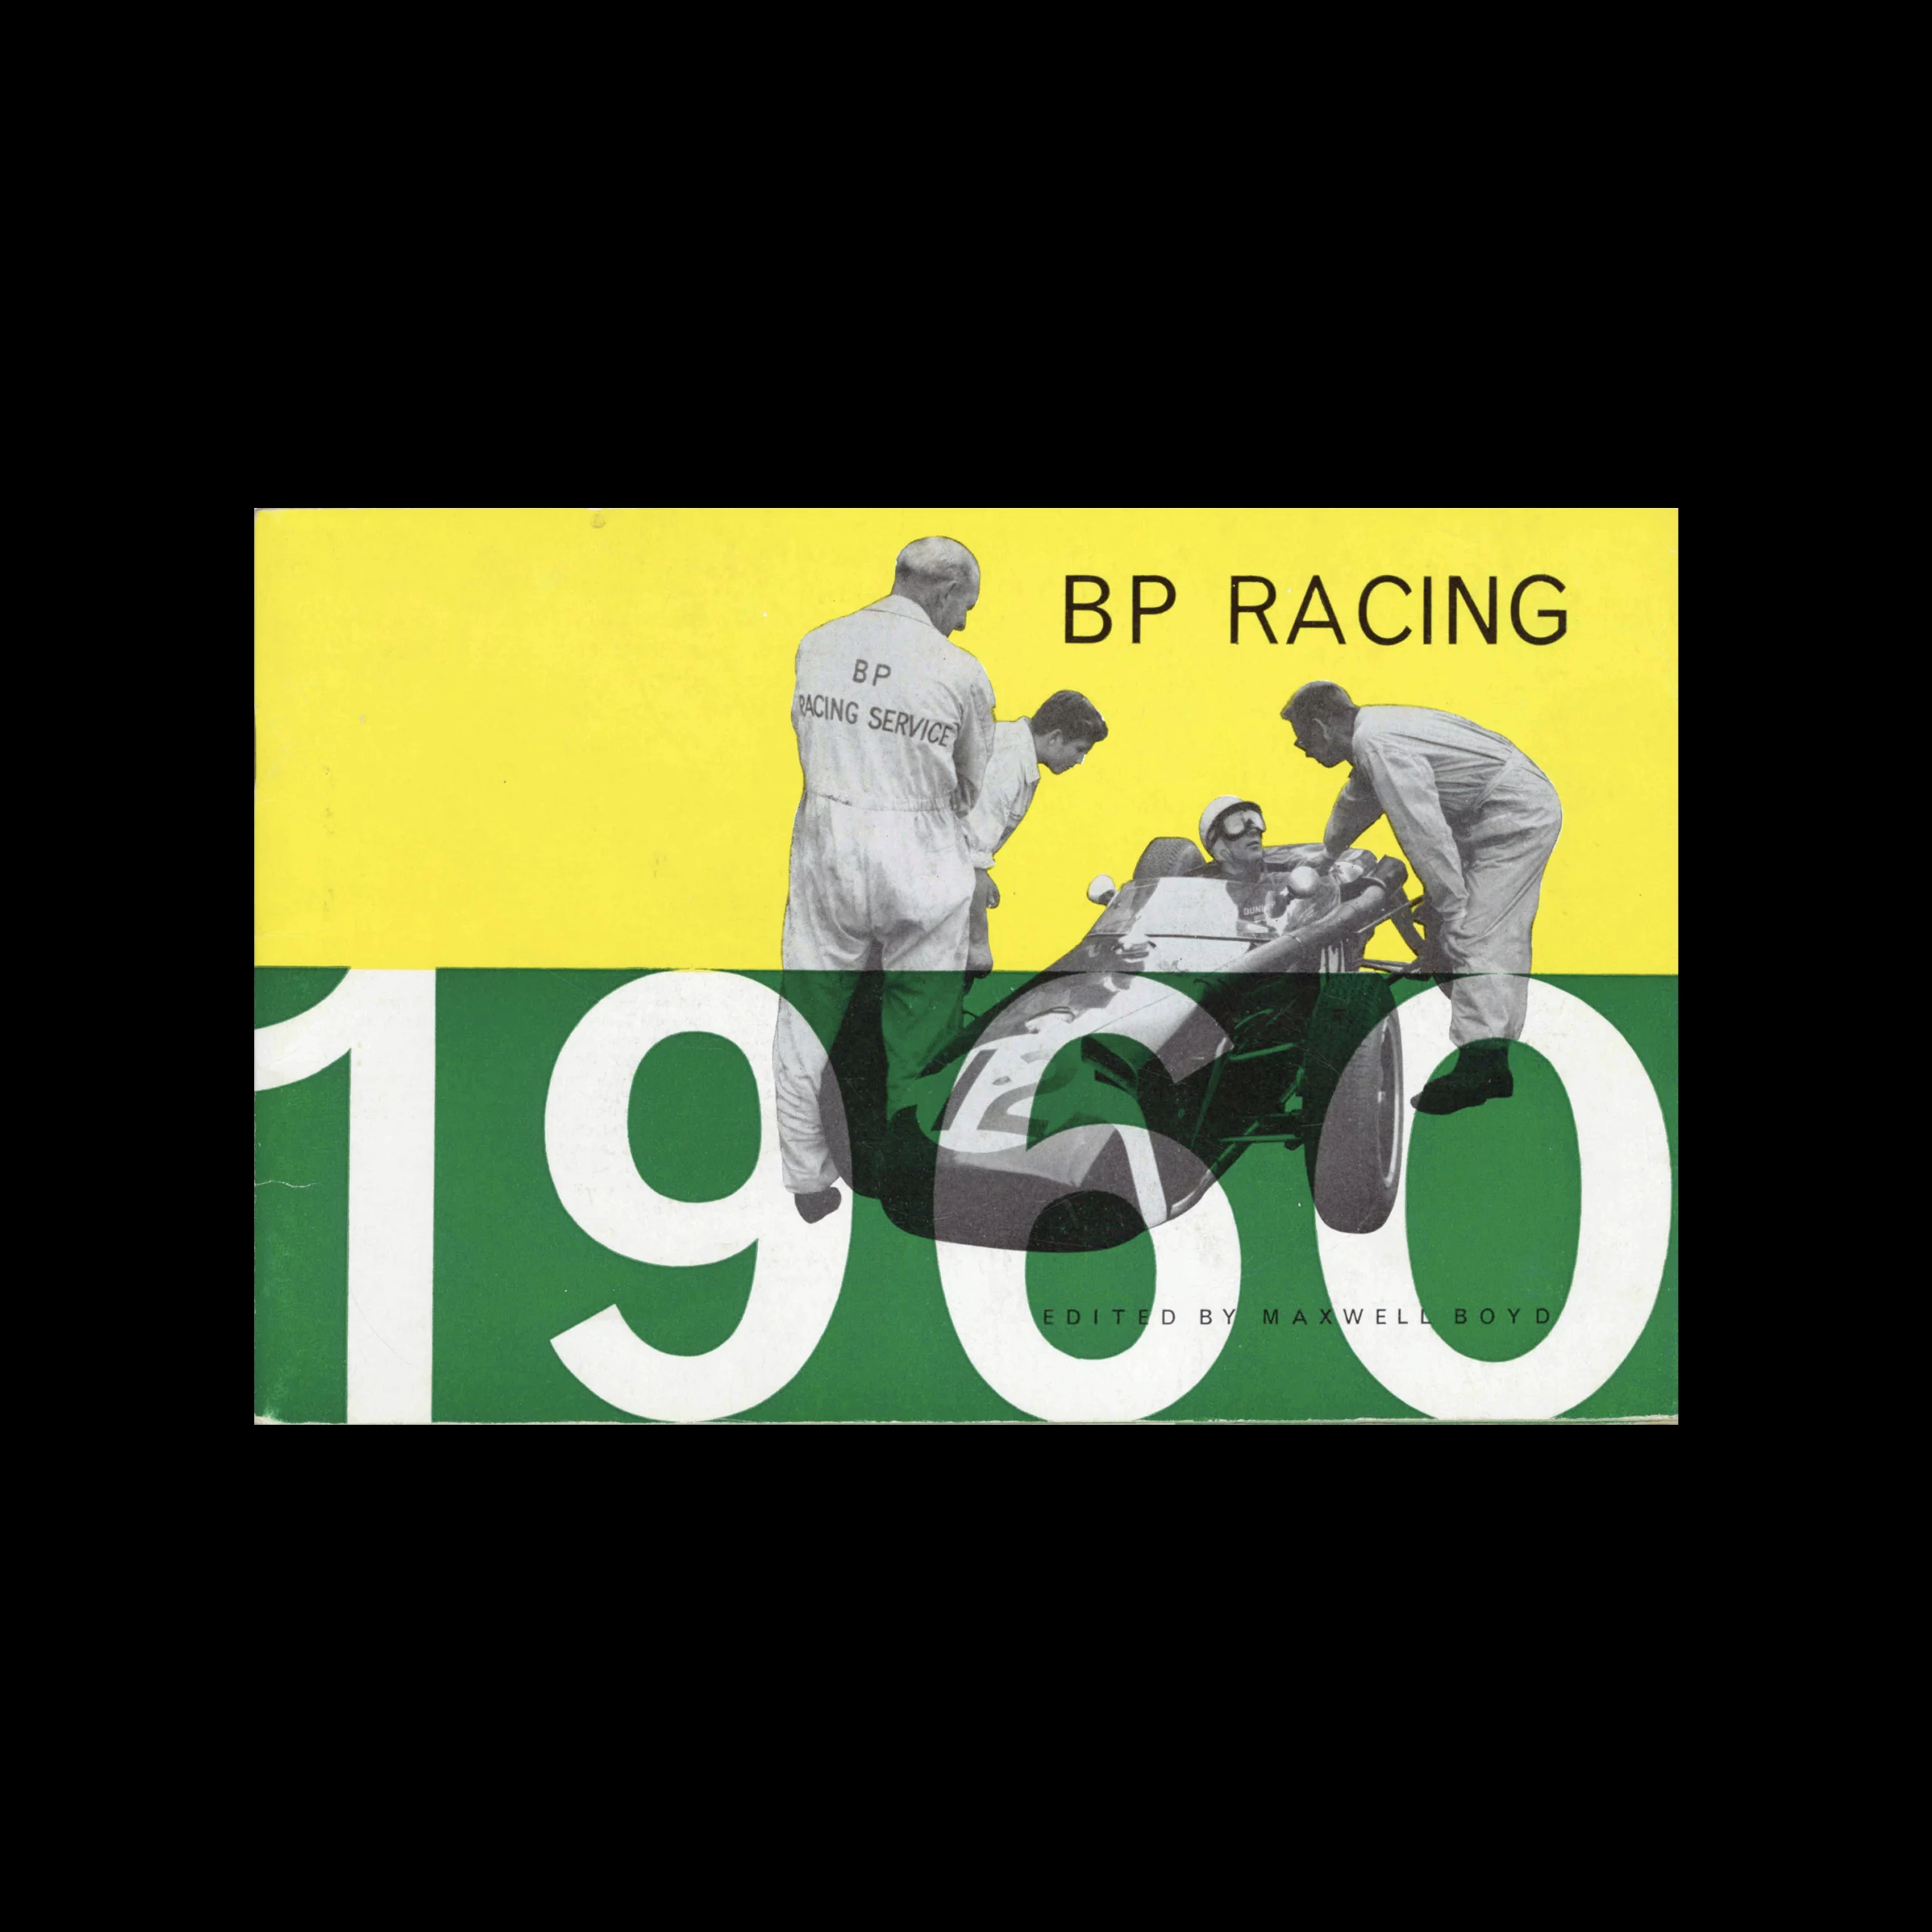 BP Racing '60, BP, 1960. Designed by Newman Neame Limited